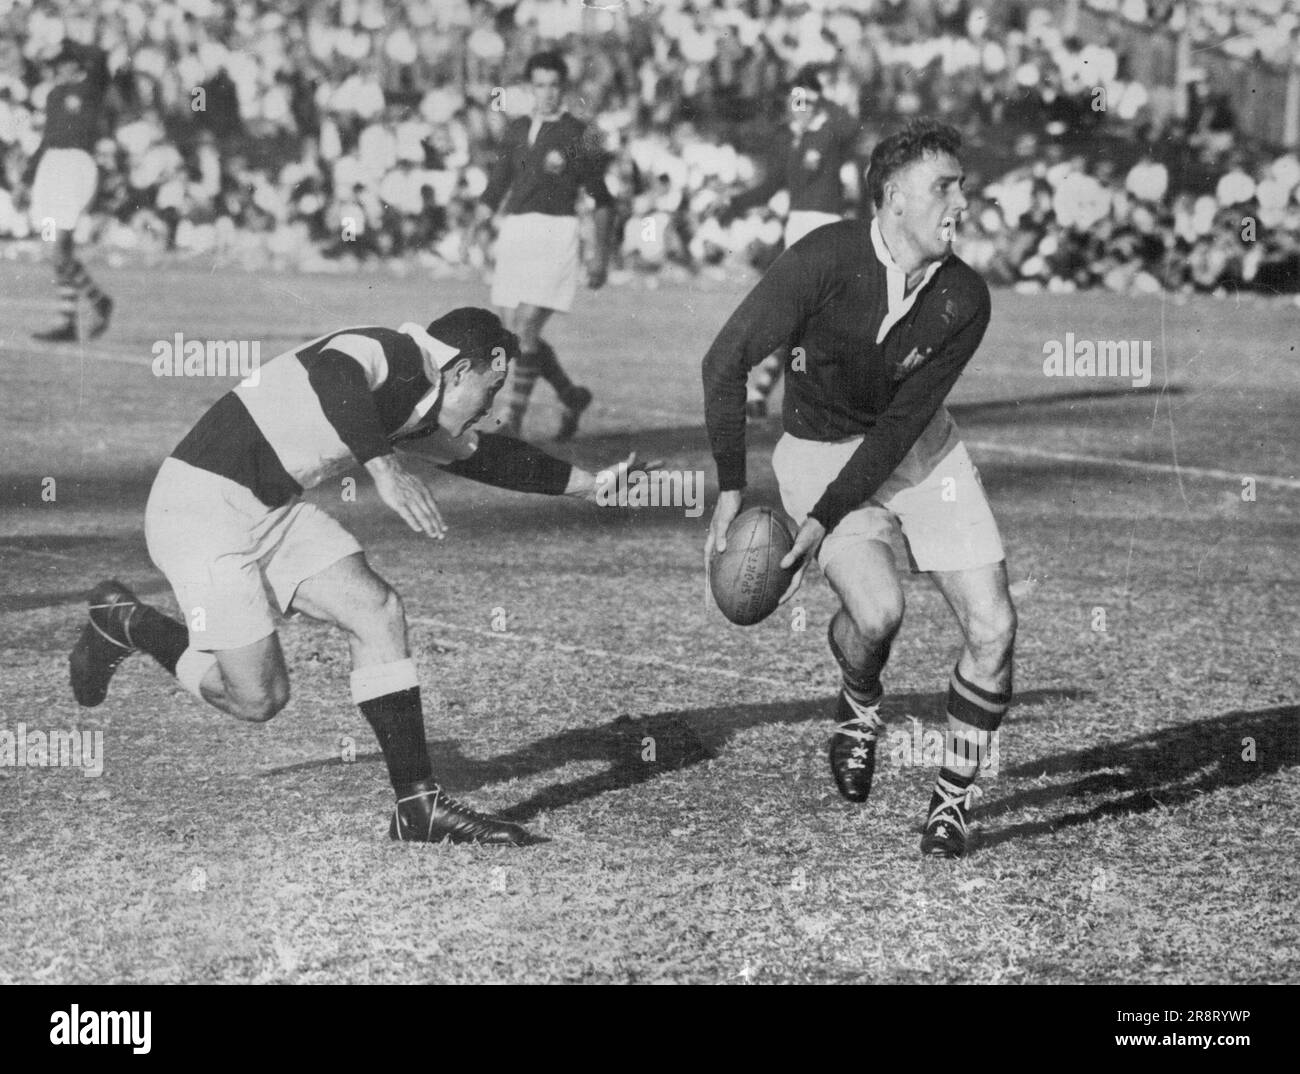 Malcolm Becket, of Natal prepares to tackle fly-half Tate as he sends the ball out to his three-quarters. Australian Rugby Union five-eighth Murray Tate about to get the ball away as Natal player M. Becket comes in for the tackle, during the ***** at Kingsmead. Murray Tate, Union five-eighth, prepares to get the ball away. July 09, 1953. Stock Photo